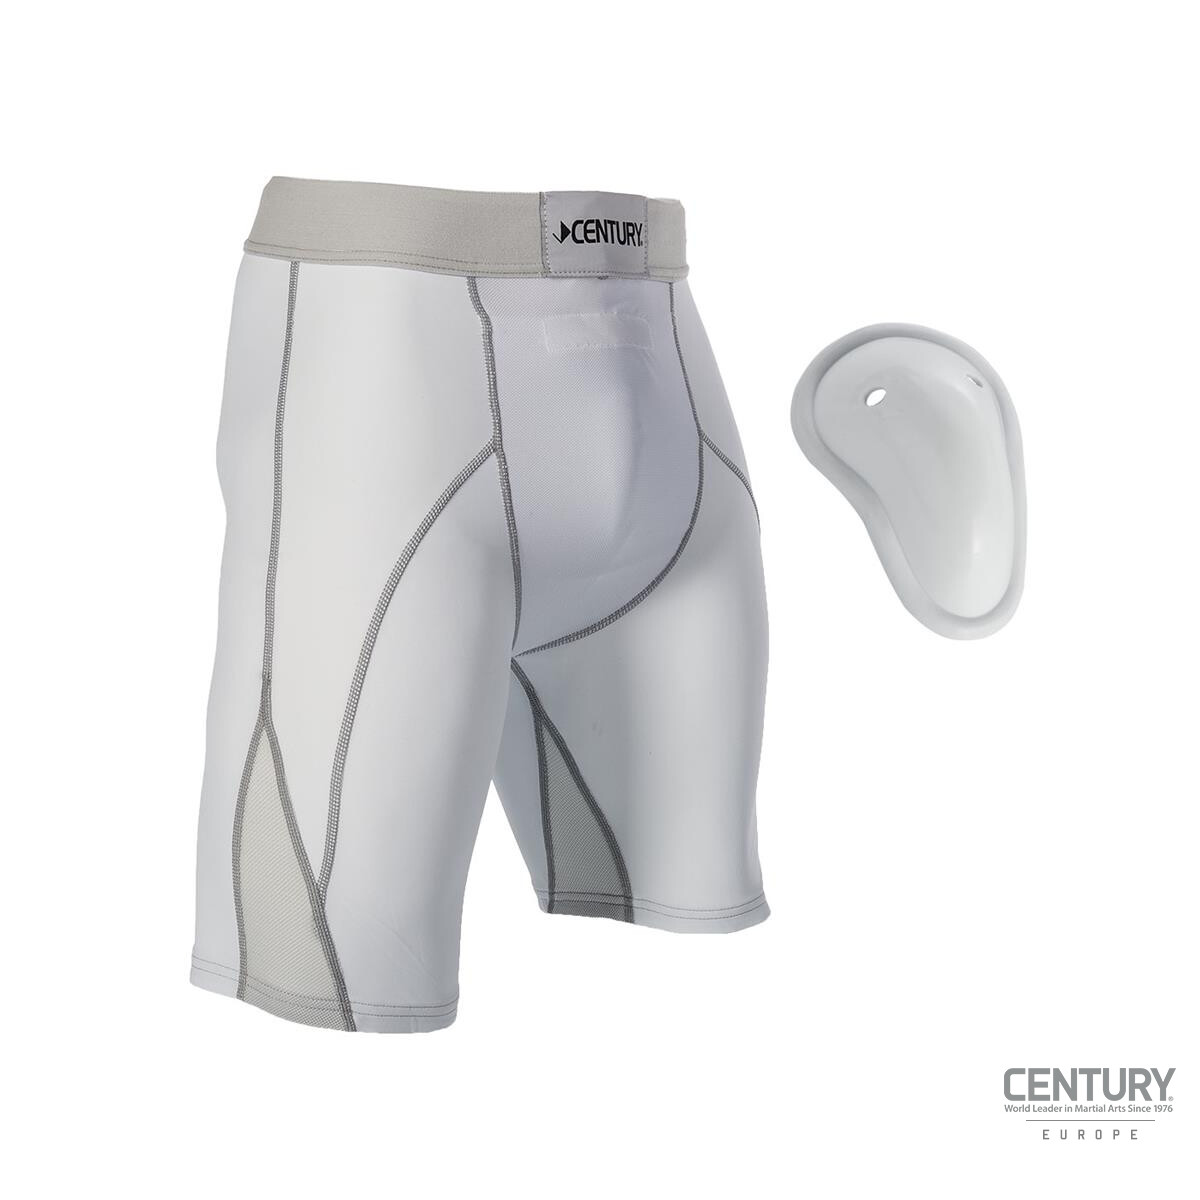 Century® Compressionsshort with Cup M